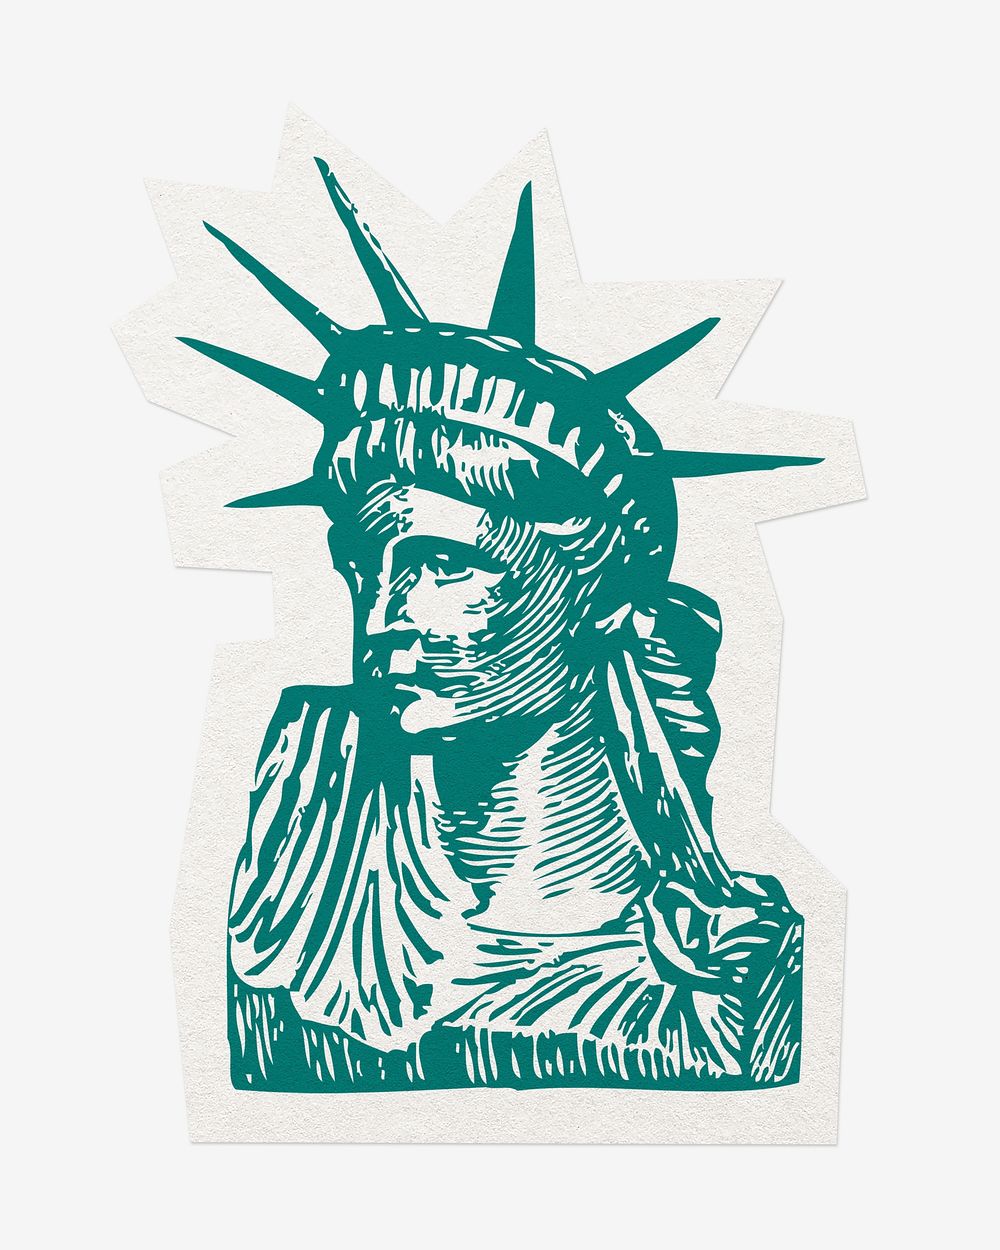 Statue of Liberty, cut out paper design, off white graphic